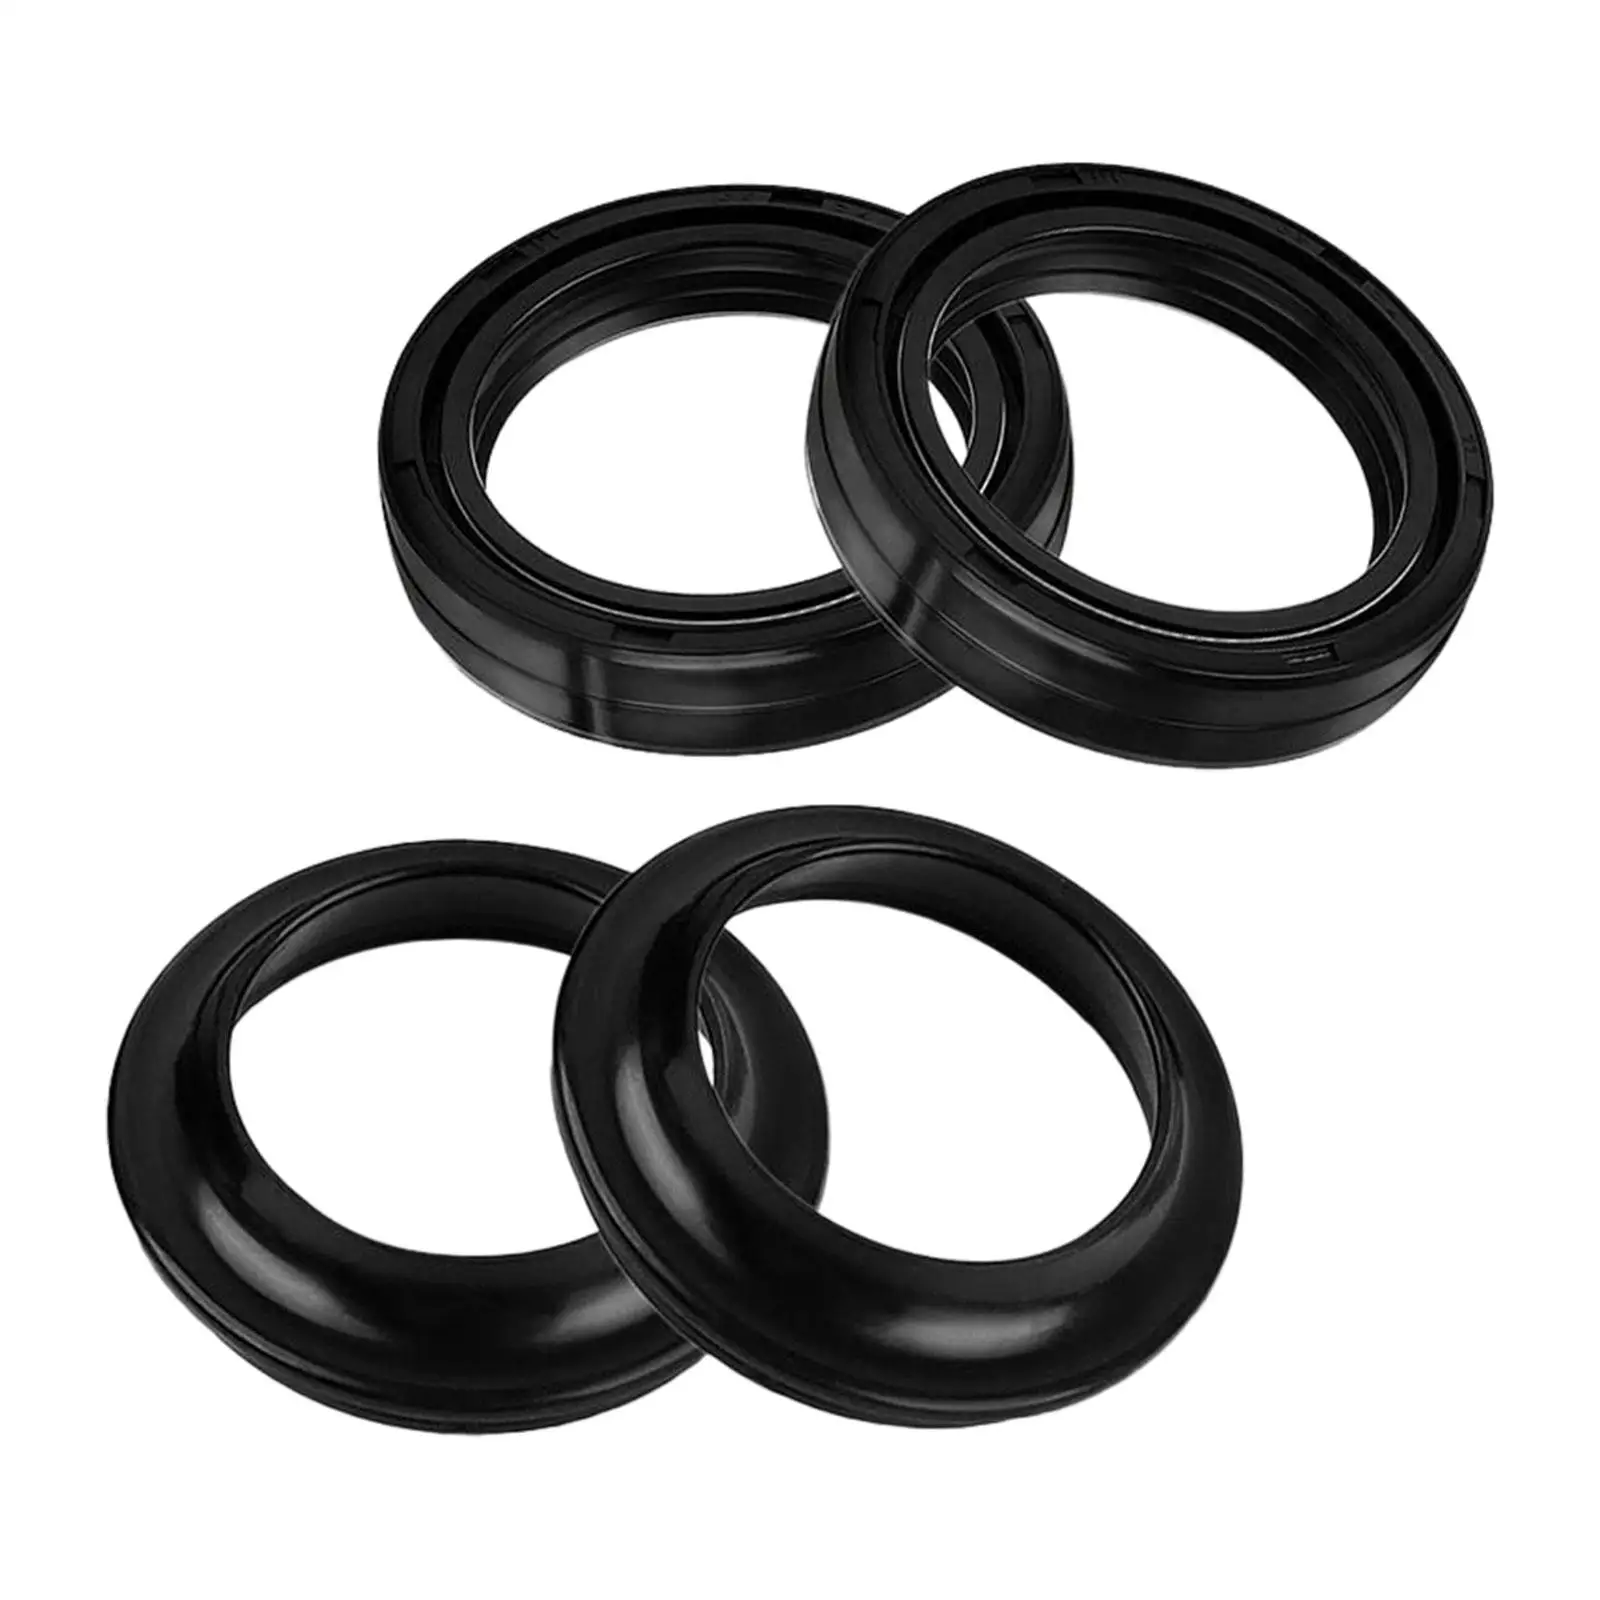 4 Pieces Front Fork Oil Seal and Dust Seal 39x52x11mm for Harley XL883N